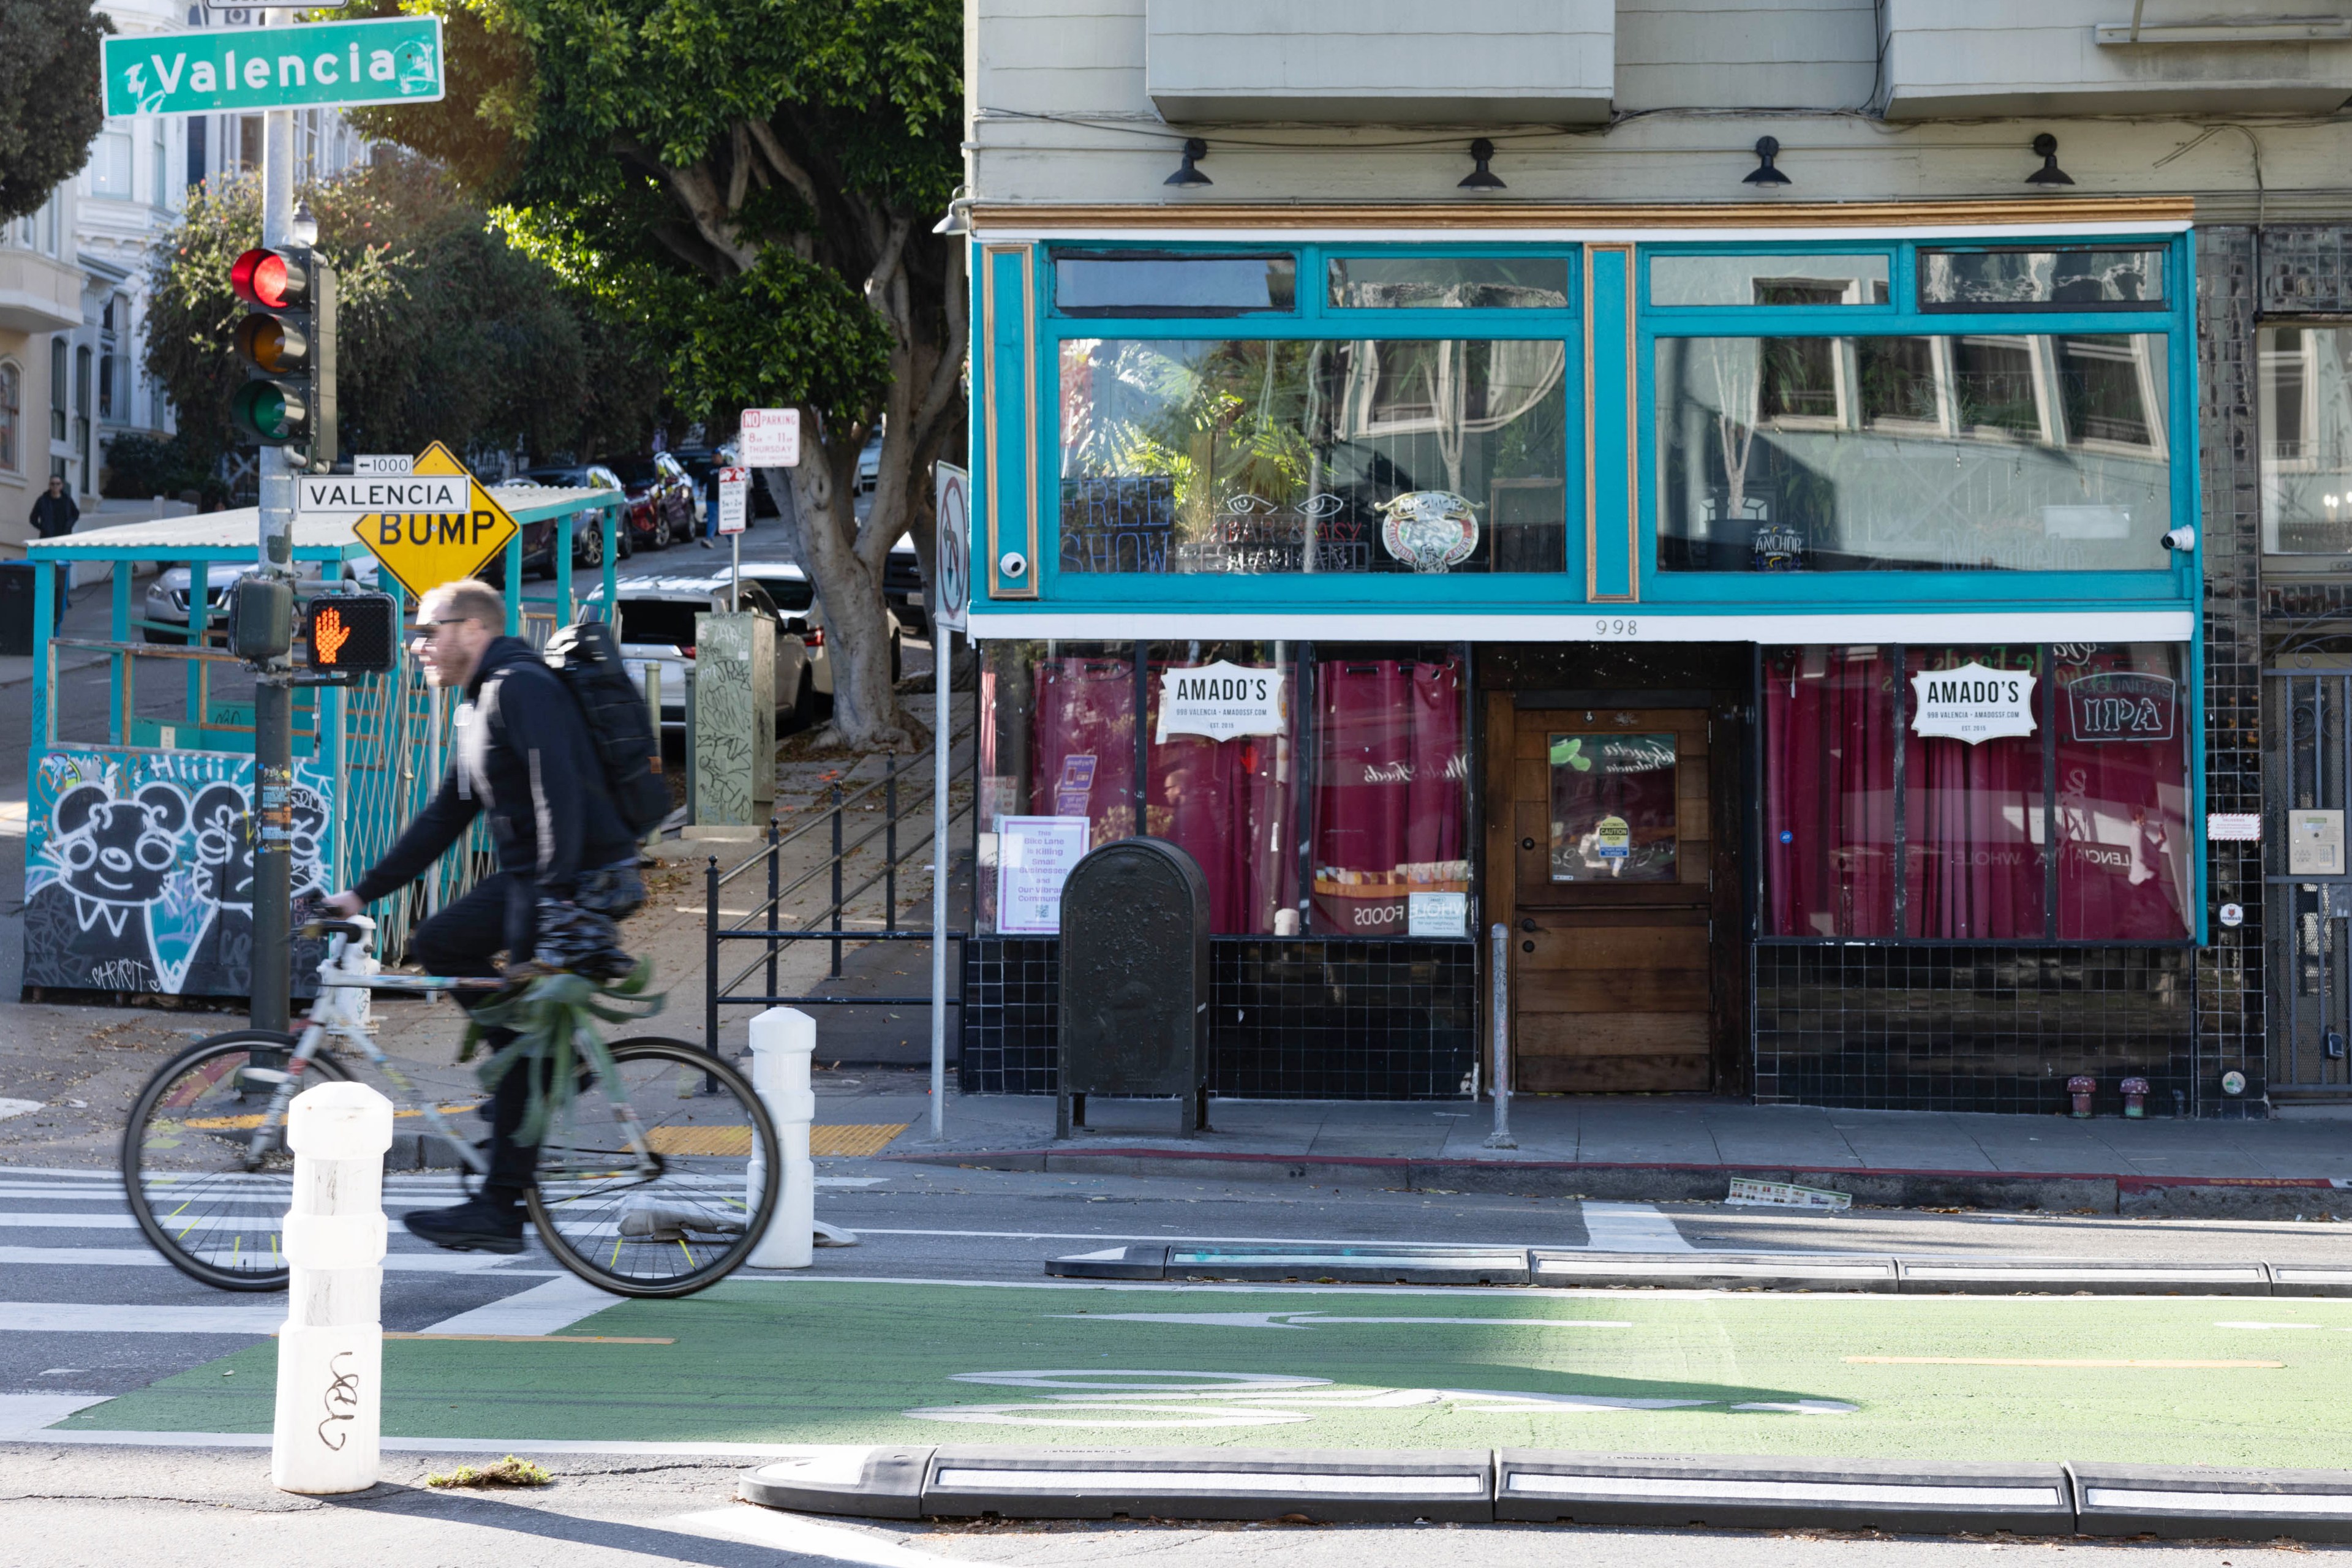 A cyclist passes by a shuttered nightclub facade on a street in daytime.